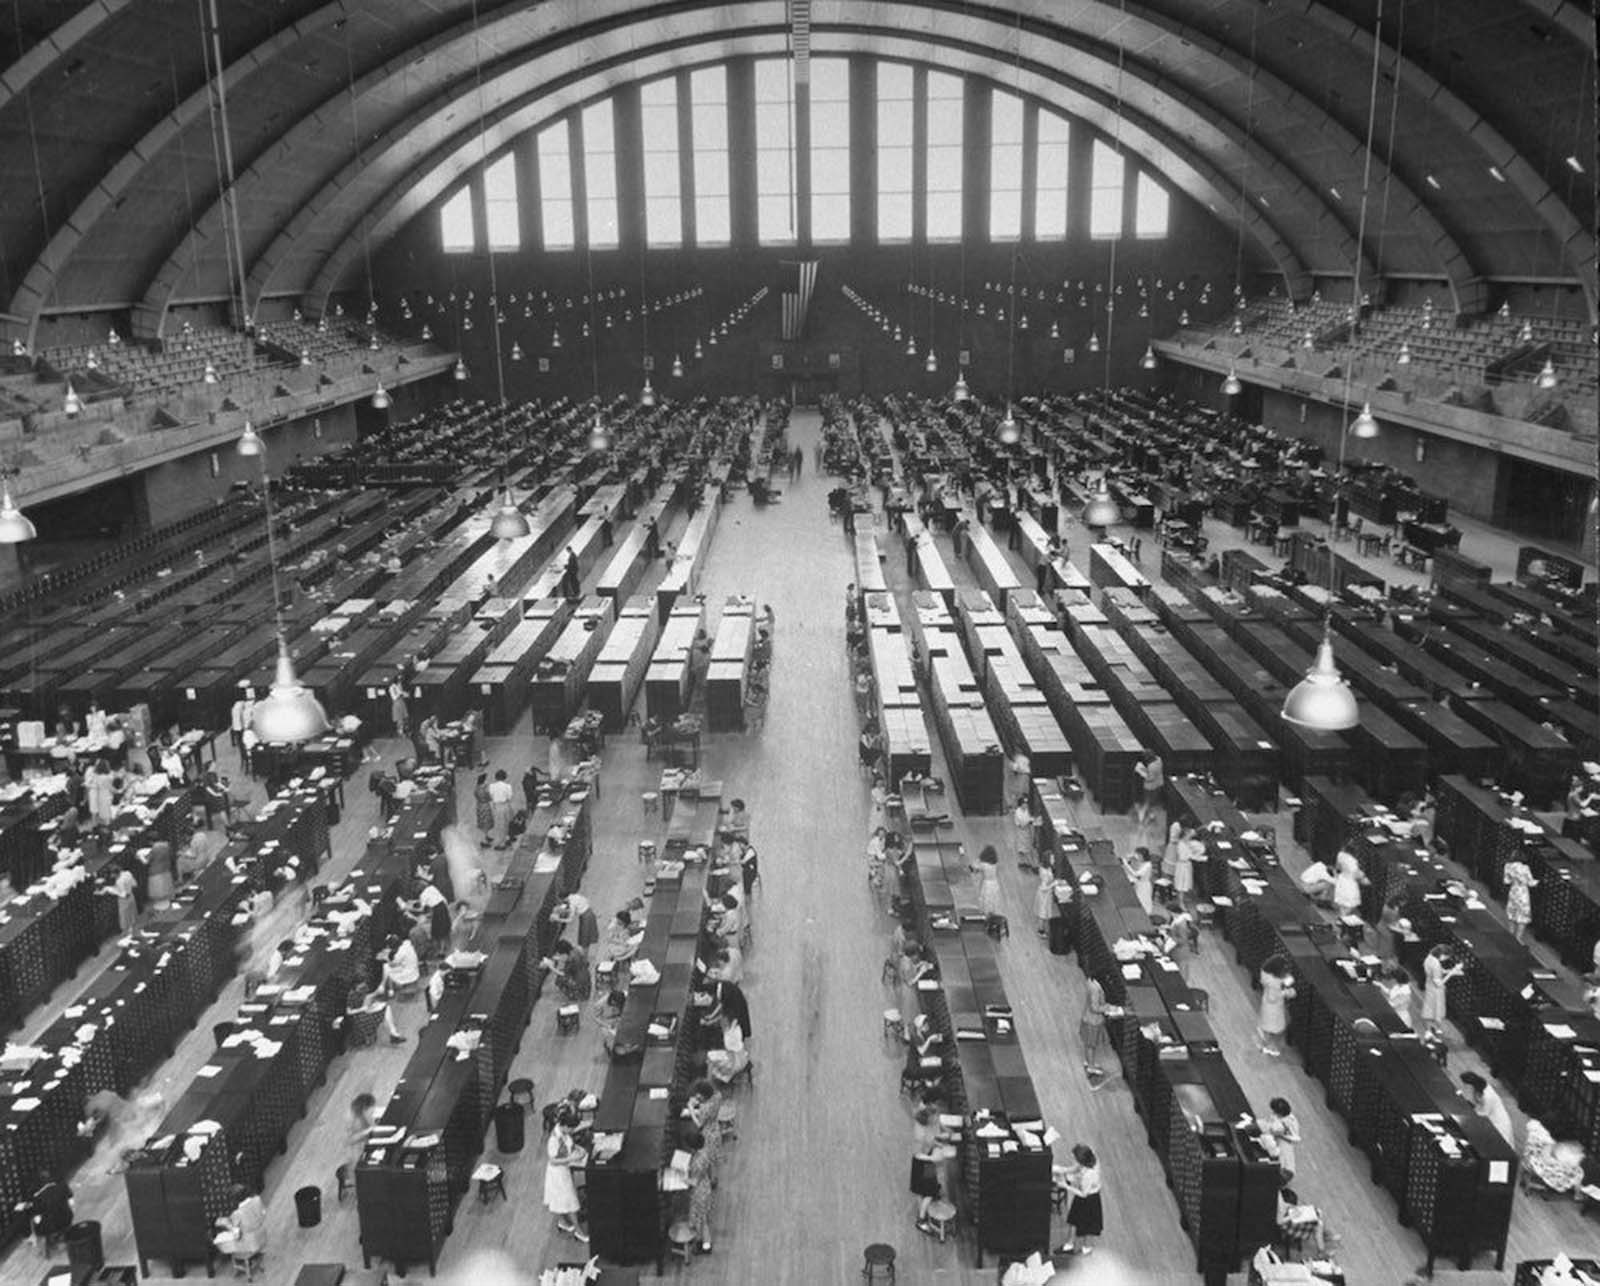 With its distinctive domed roof, the D.C. Armory opened in 1941 as the headquarters, armory and training facility for the D.C. National Guard.